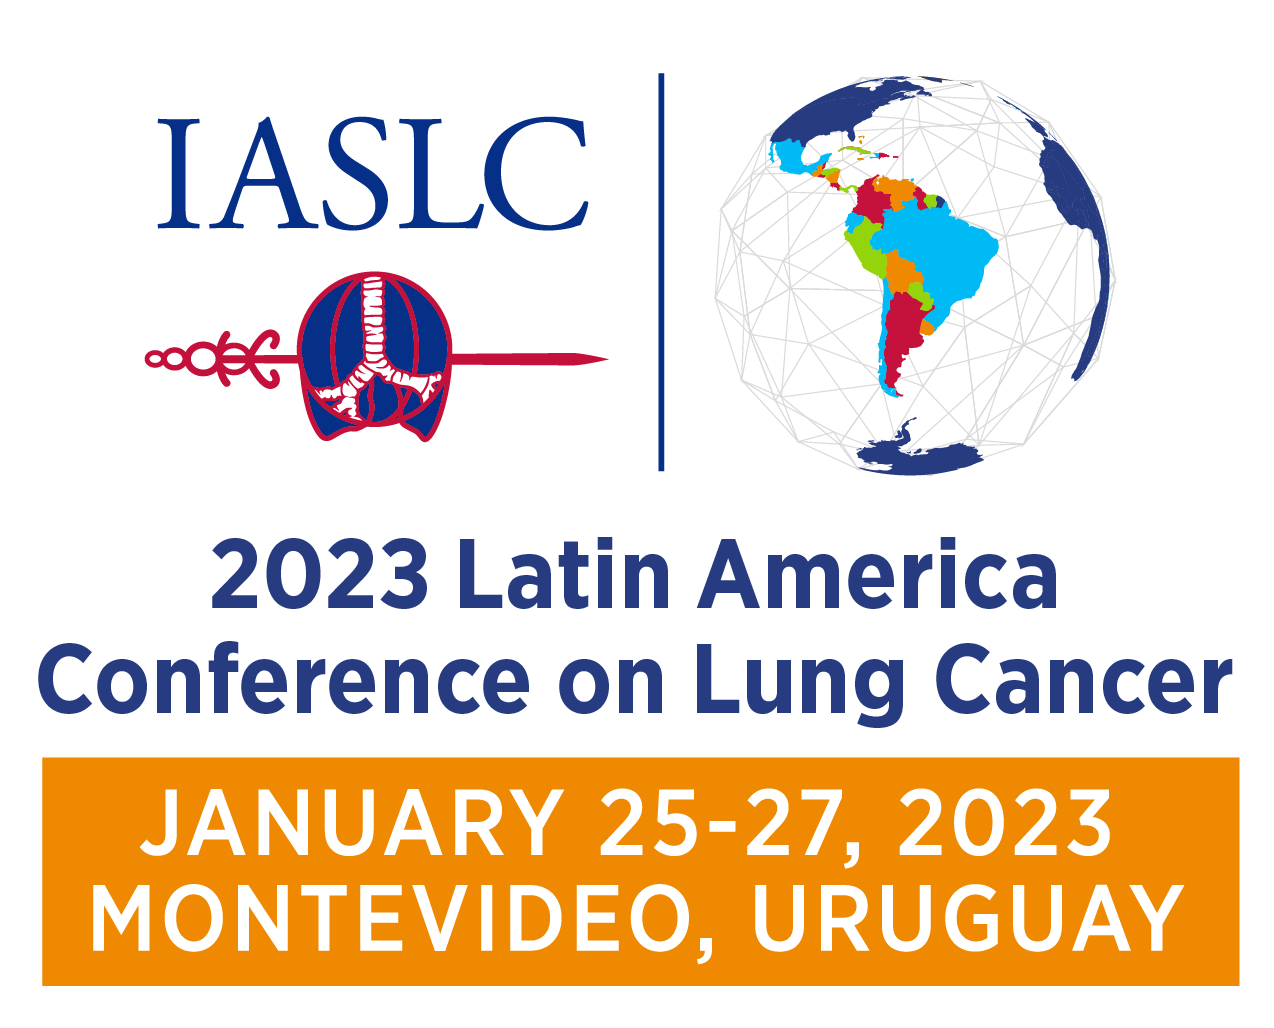 IASLC 2023 Latin America Conference on Lung Cancer